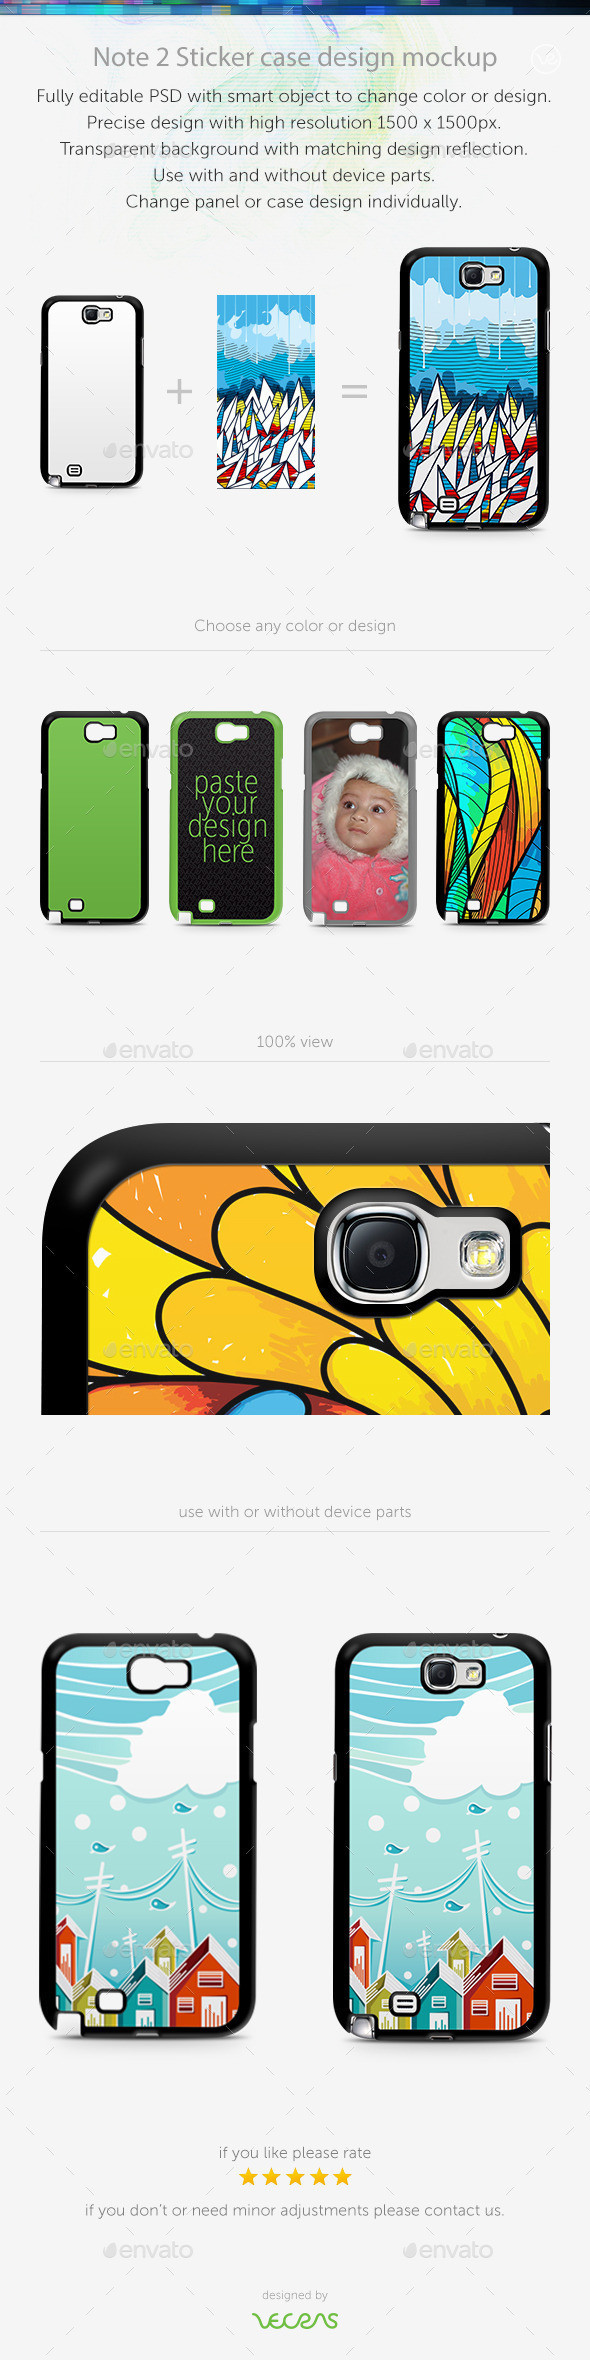 Preview note 2 stickercase mockup back